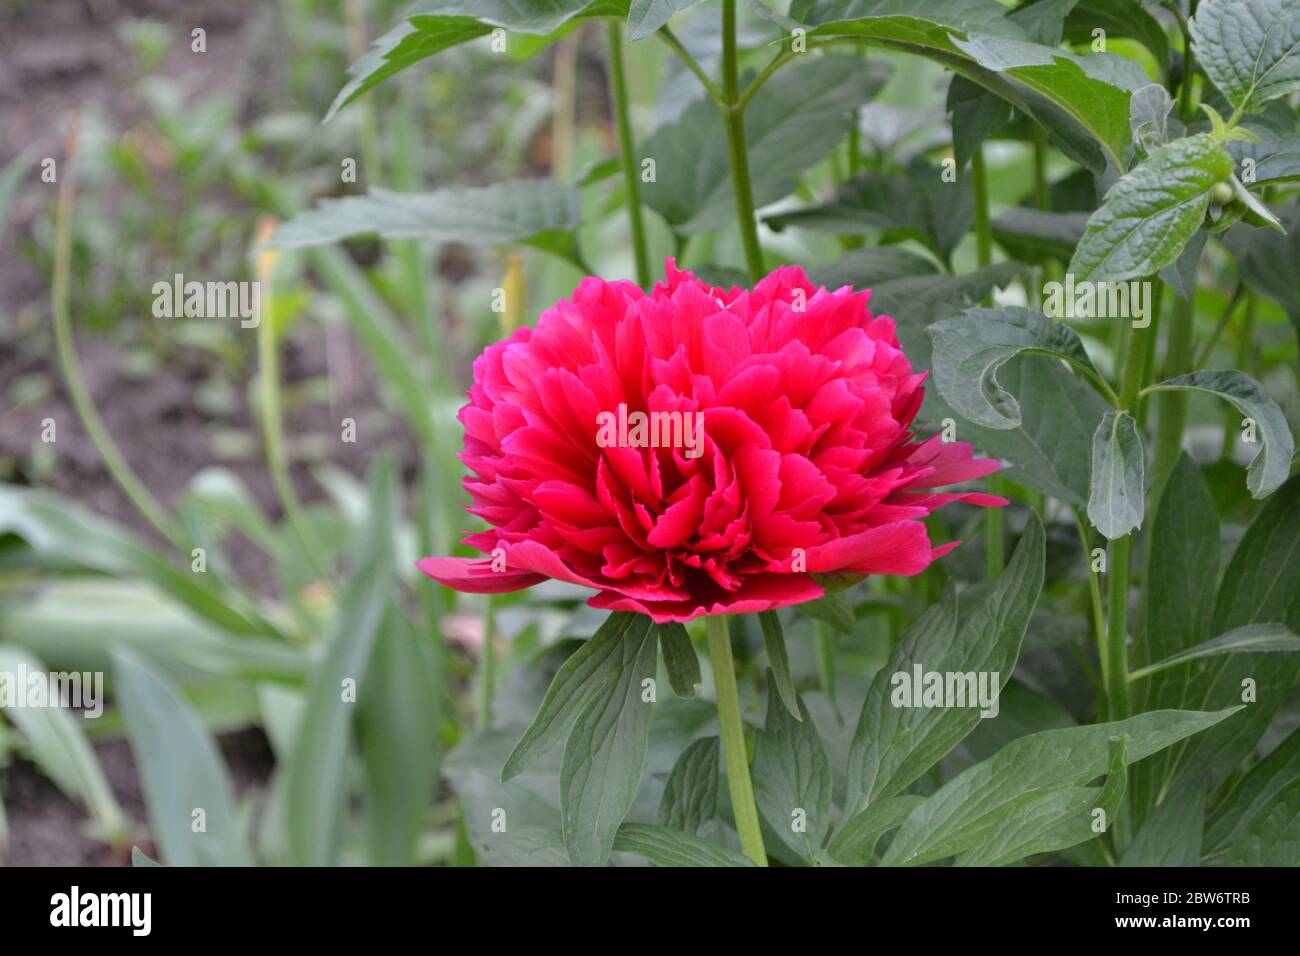 Red flowers. Gardening. Home garden, flower bed. House. Green leaves, bushes. Flower Peony. Paeonia, herbaceous perennials and deciduous shrubs Stock Photo